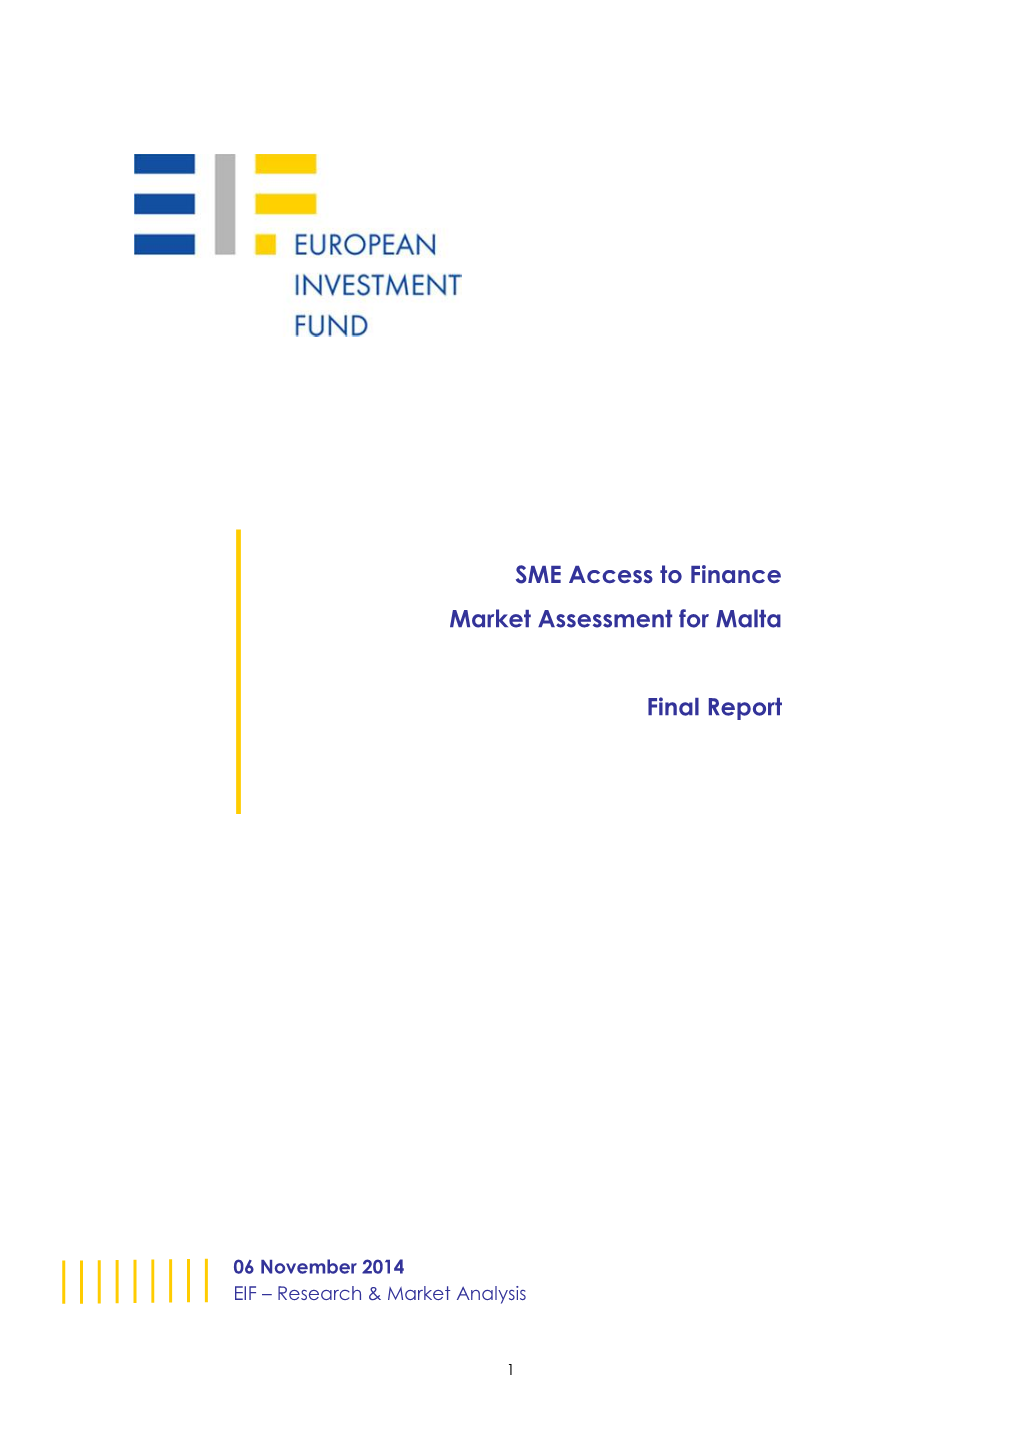 SME Access to Finance Market Assessment for Malta Final Report